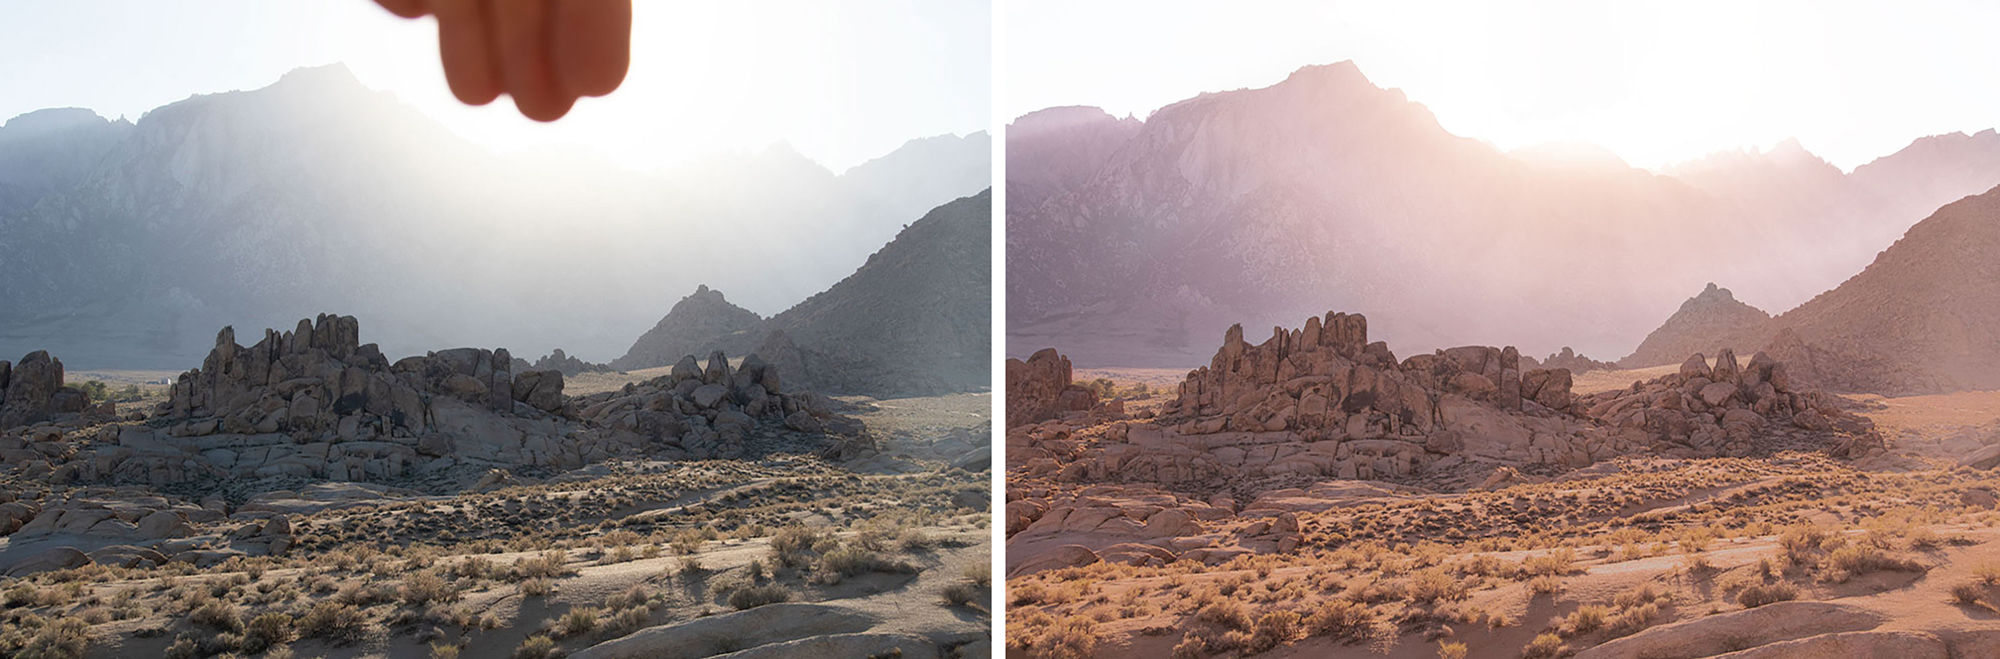 Alabama Hills before and after